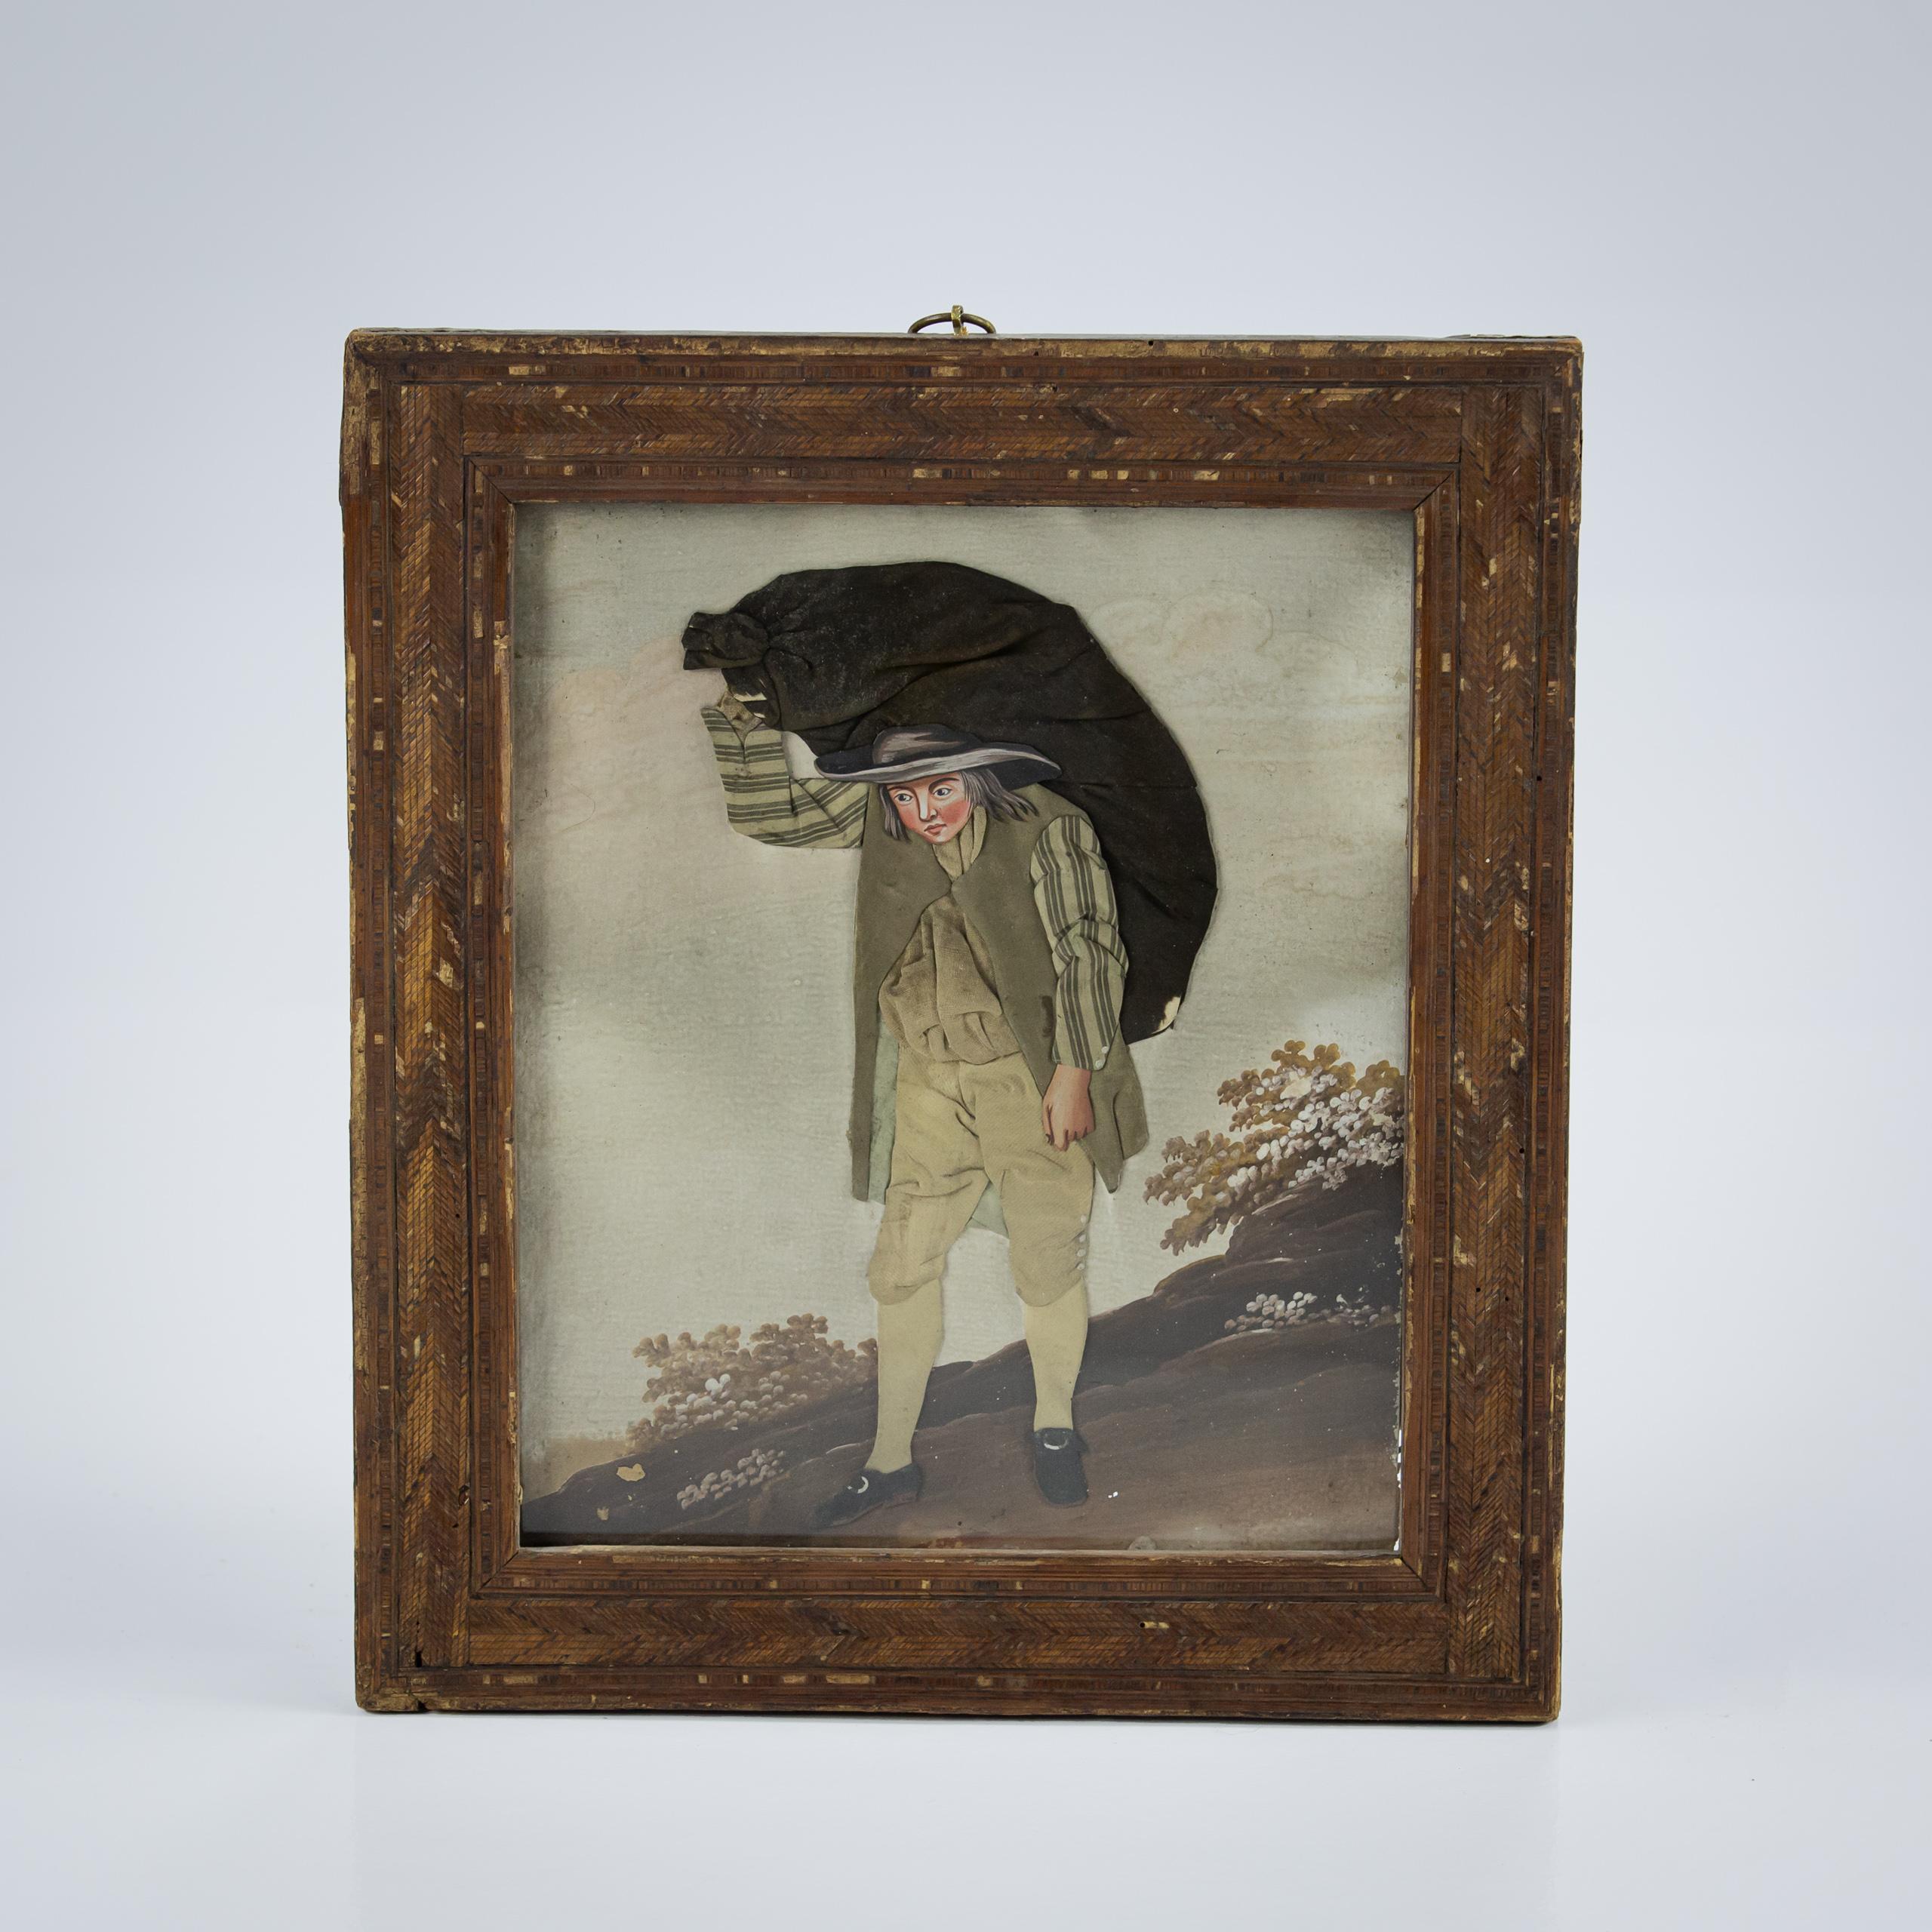 Mid 19th Century Velvet and Cloth applique Portrait of a man carrying a large bag. untouched original condition, found in the original straw work frame (some losses and damage) In the Manner of George Smart. Circa 1850